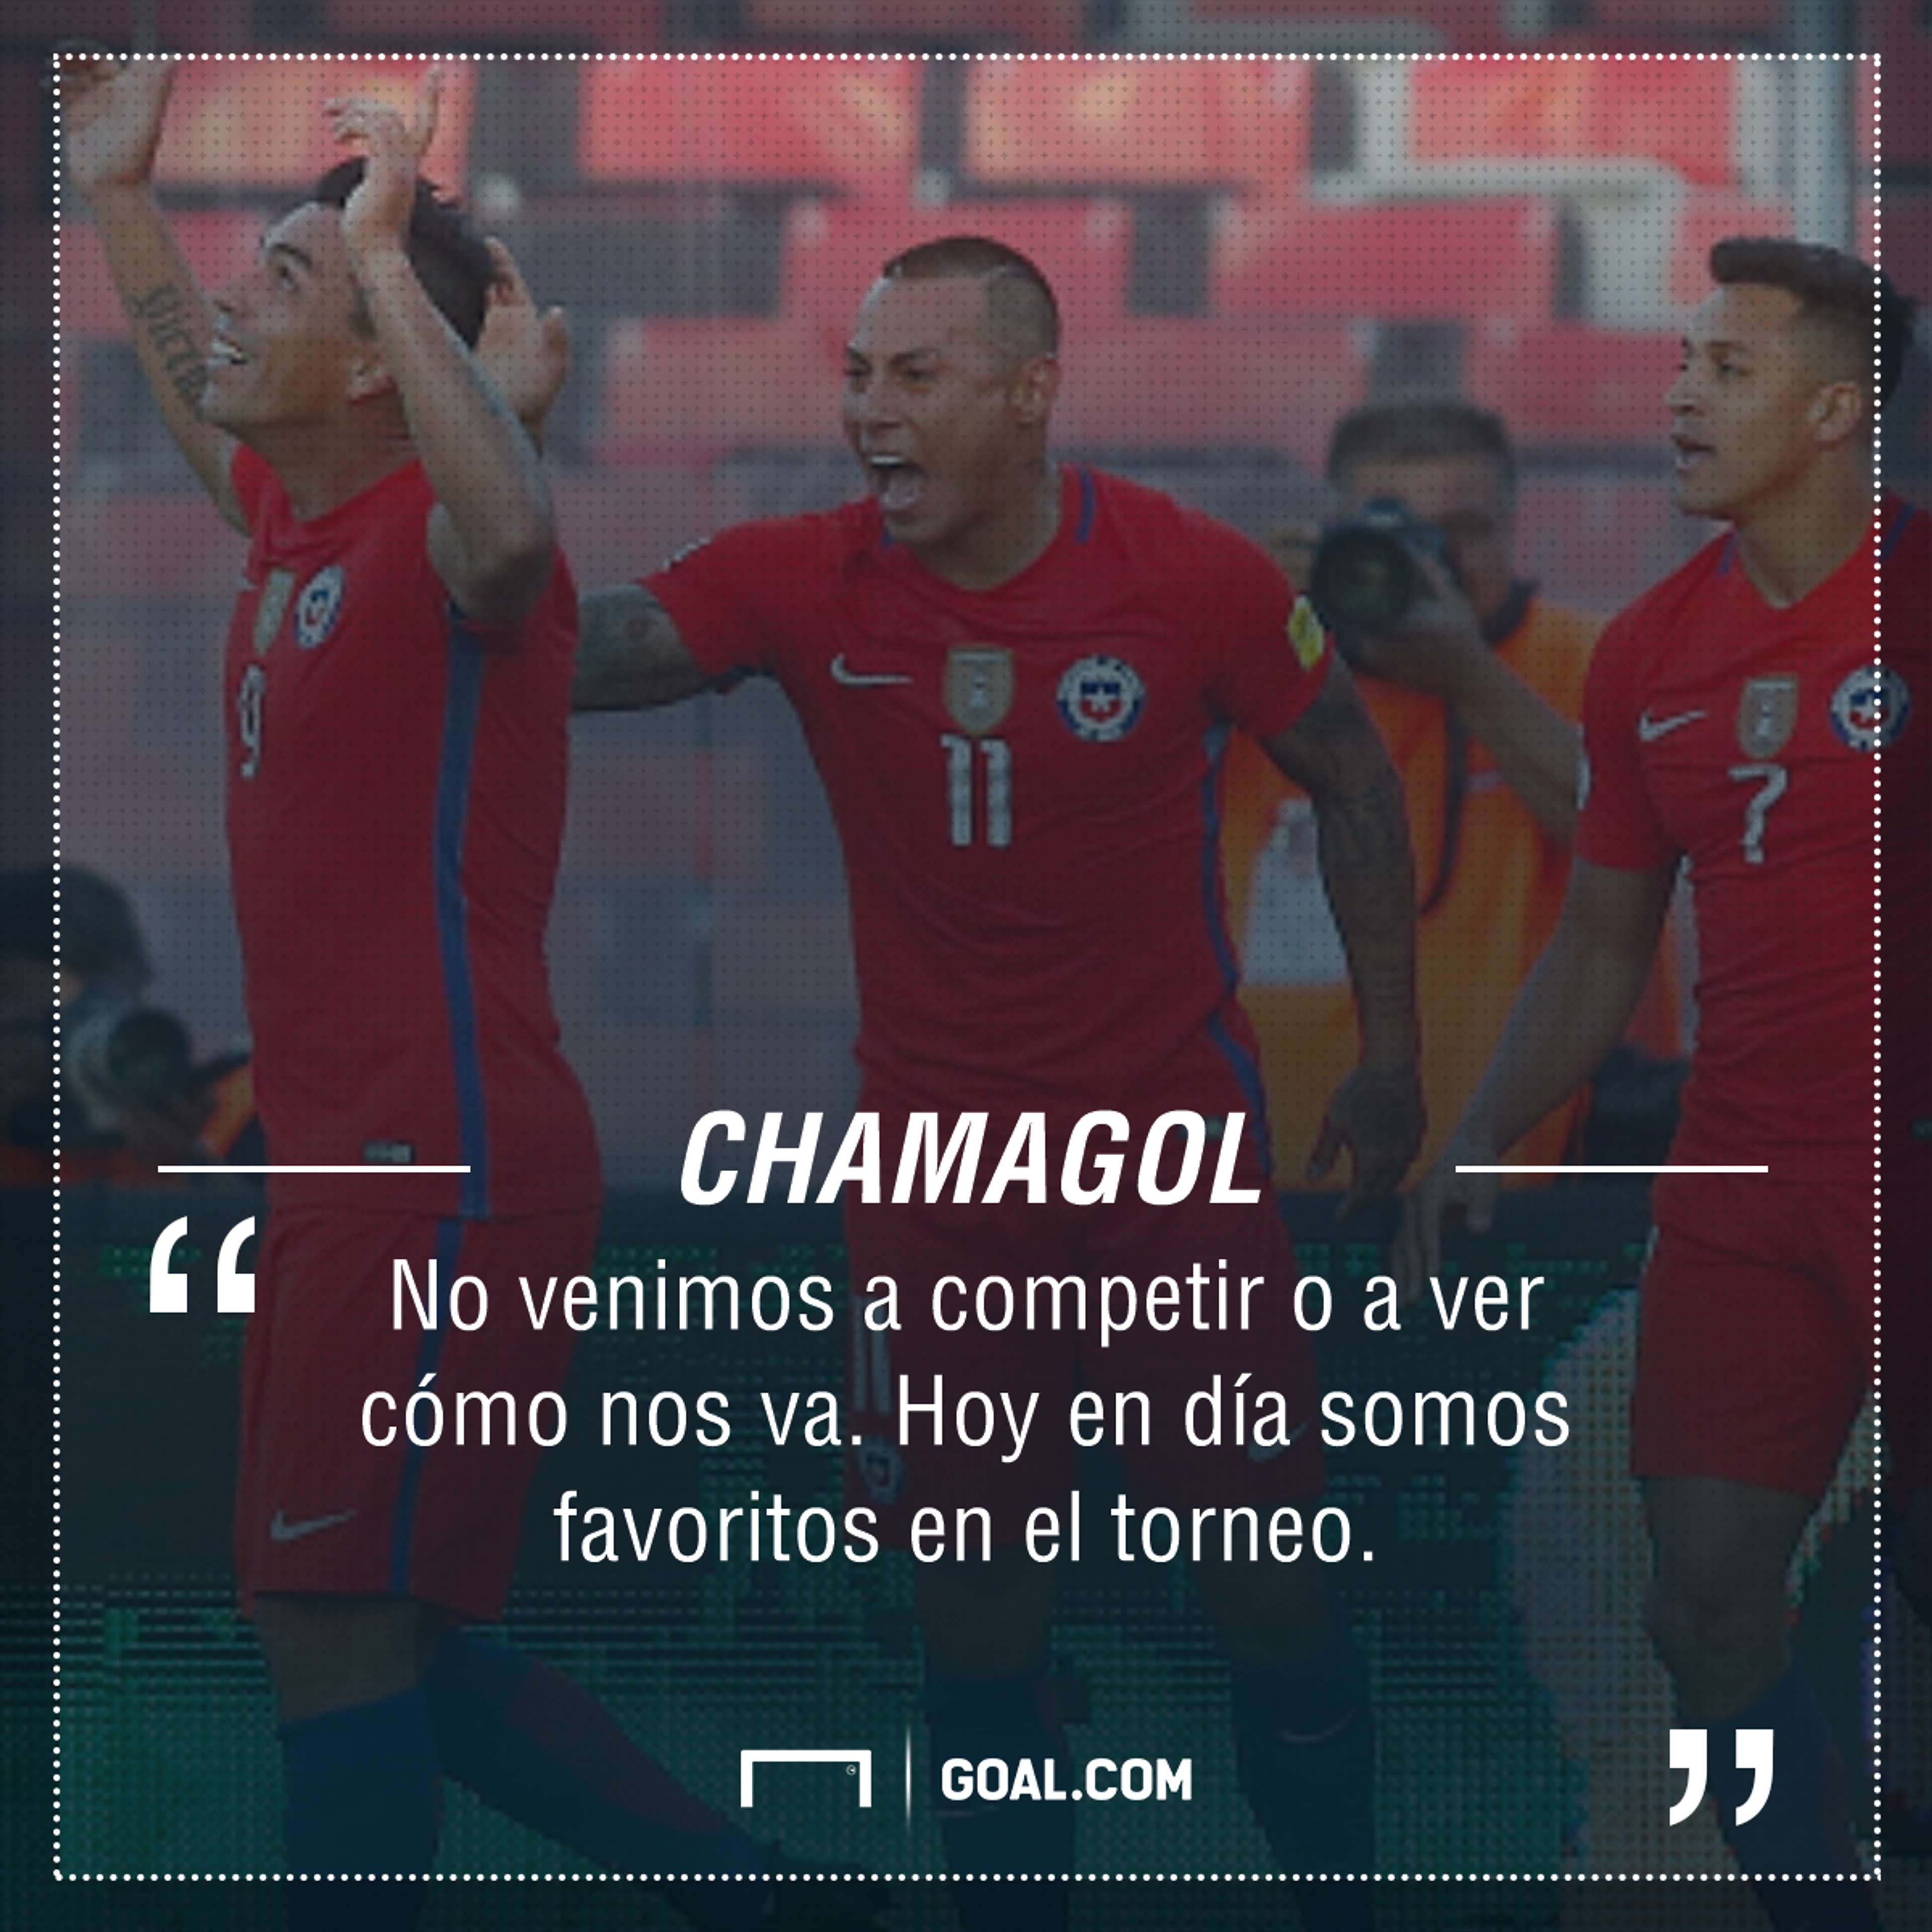 Frases Chamagol exclusiva